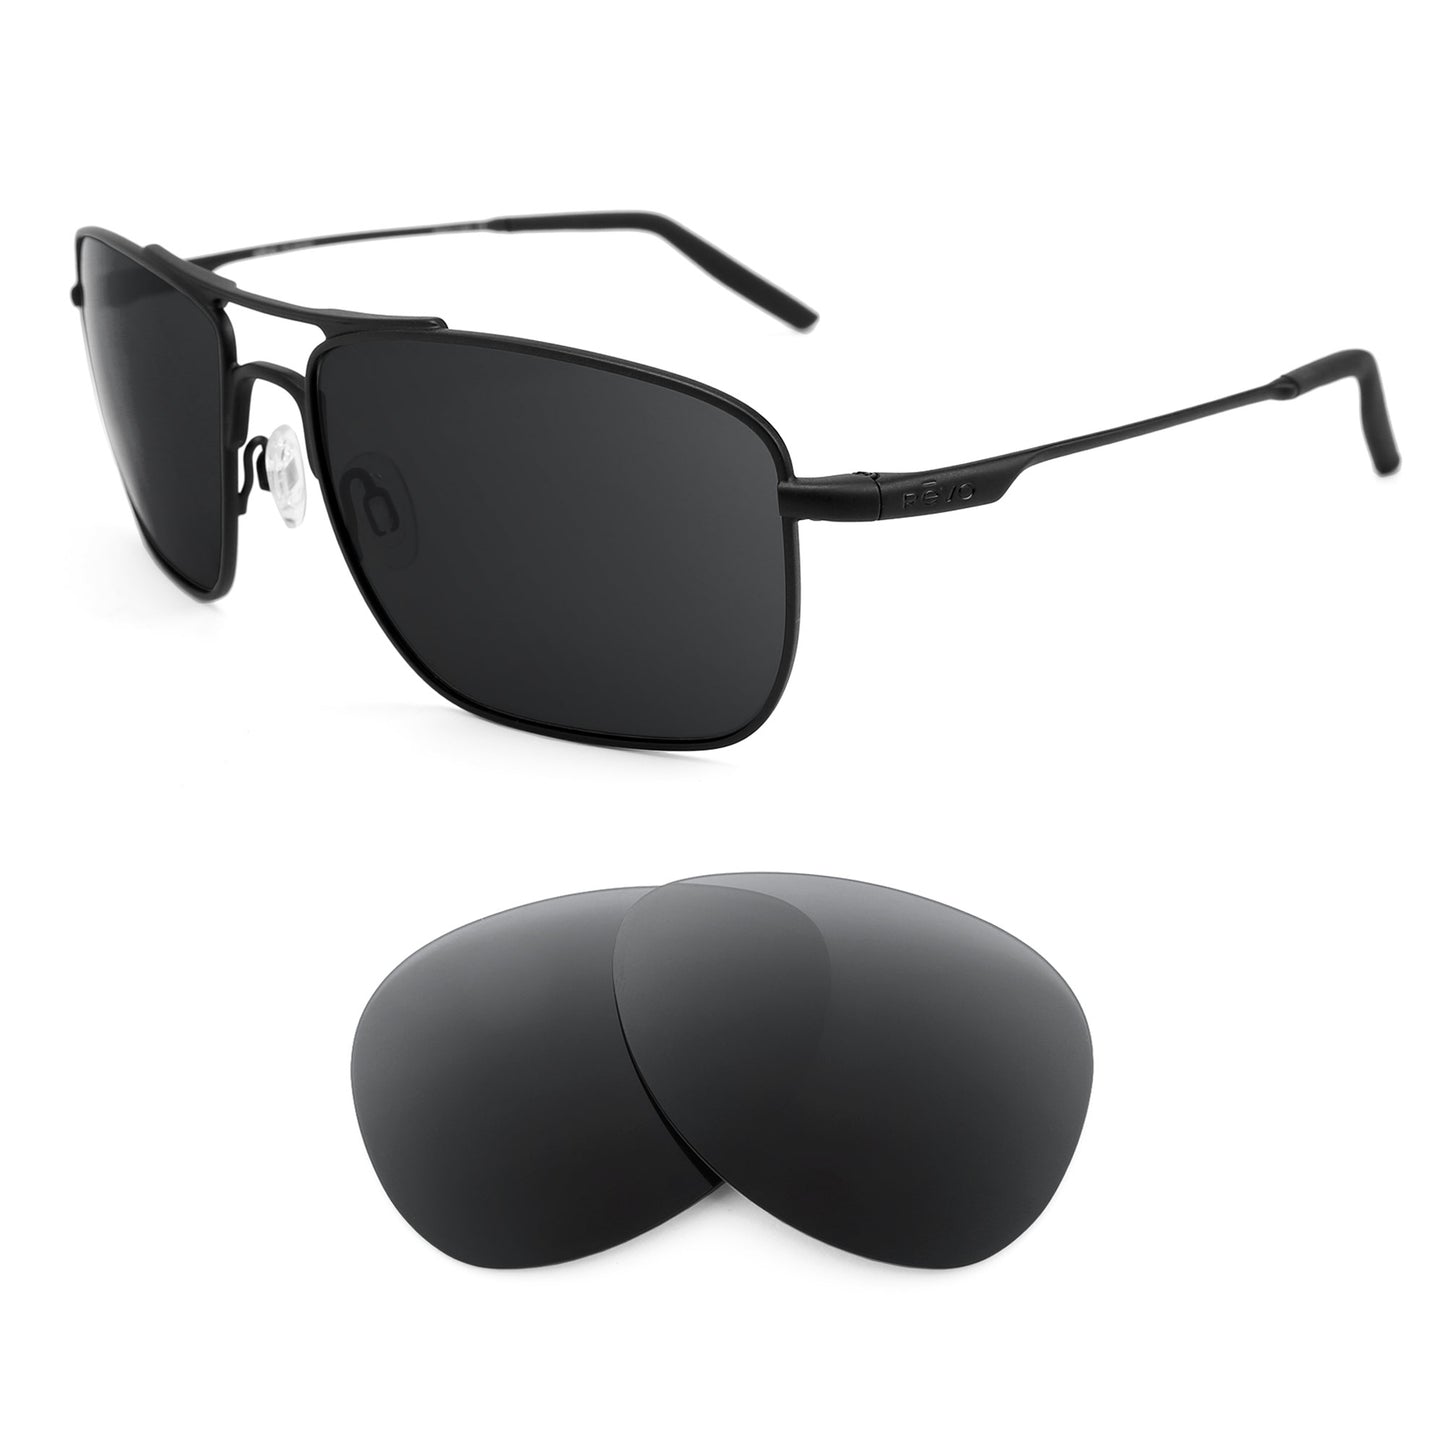 Revo Groundspeed RE3089 sunglasses with replacement lenses